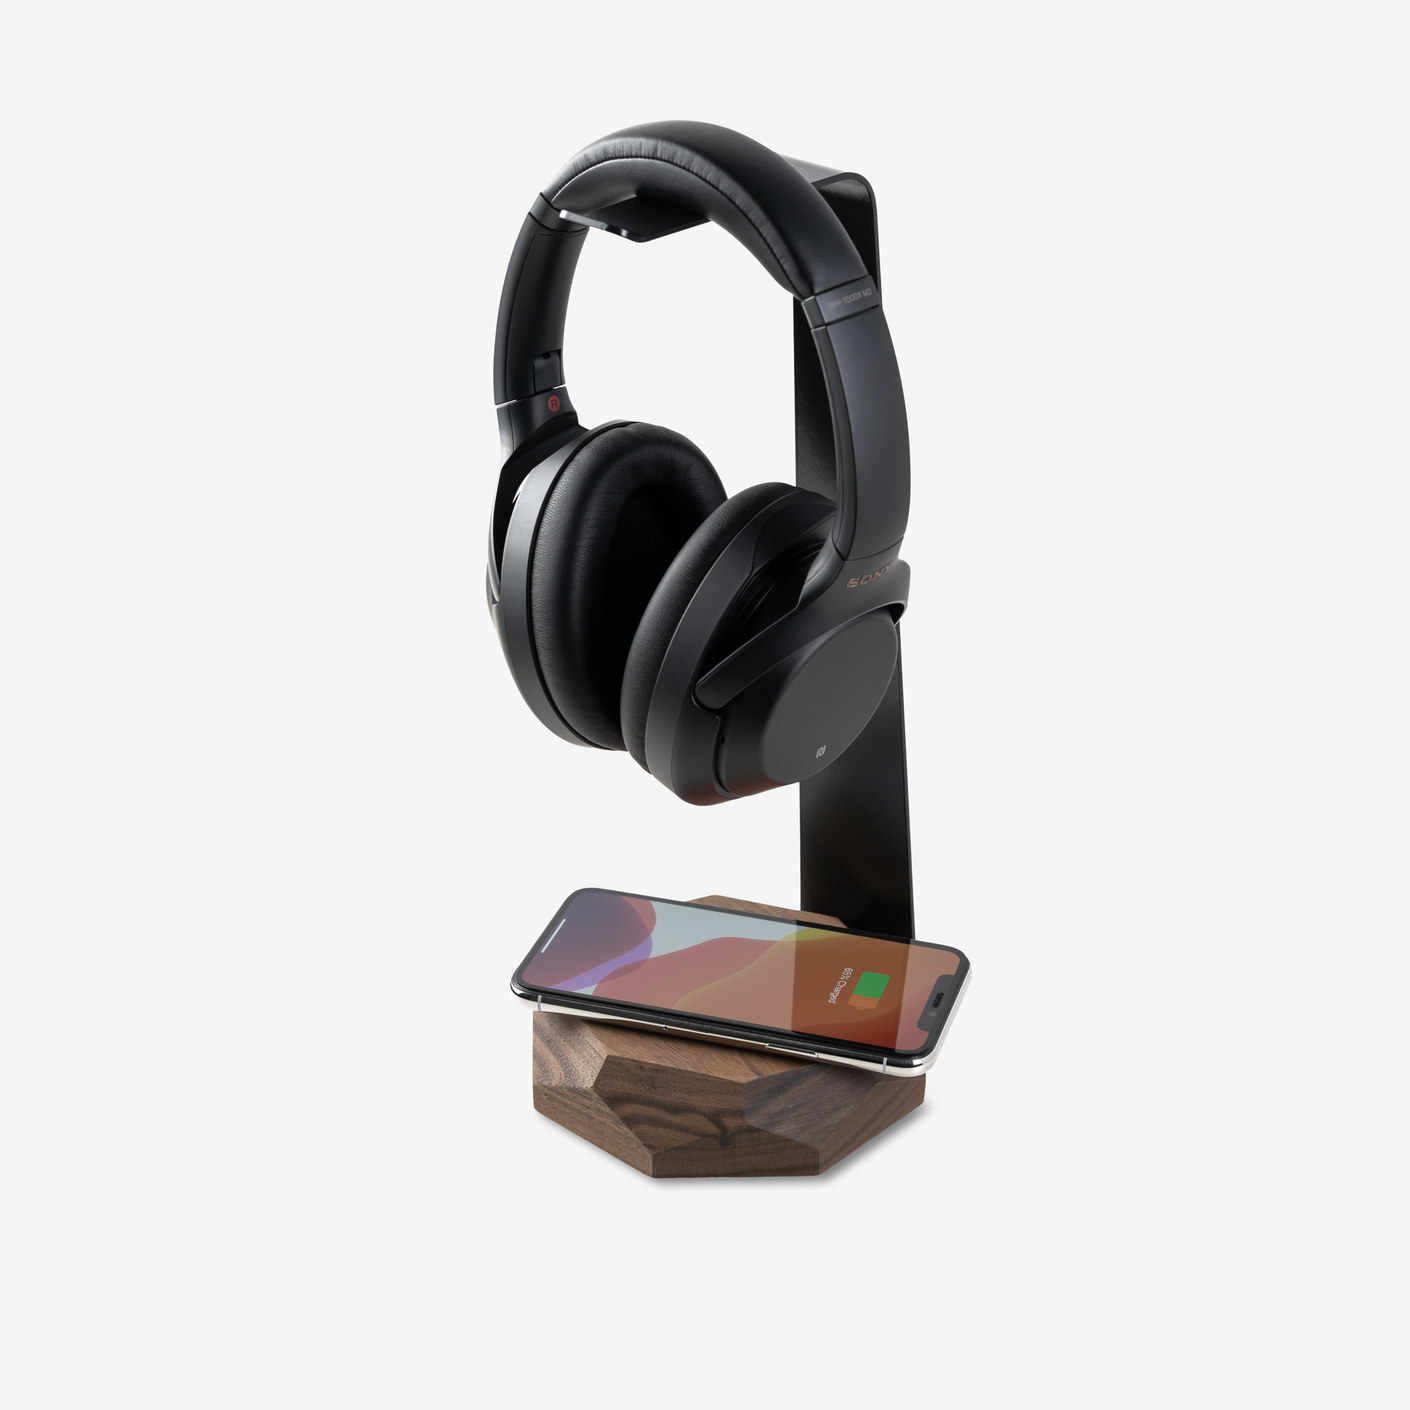 The two-in-one walnut headphone stand &amp;amp; charger